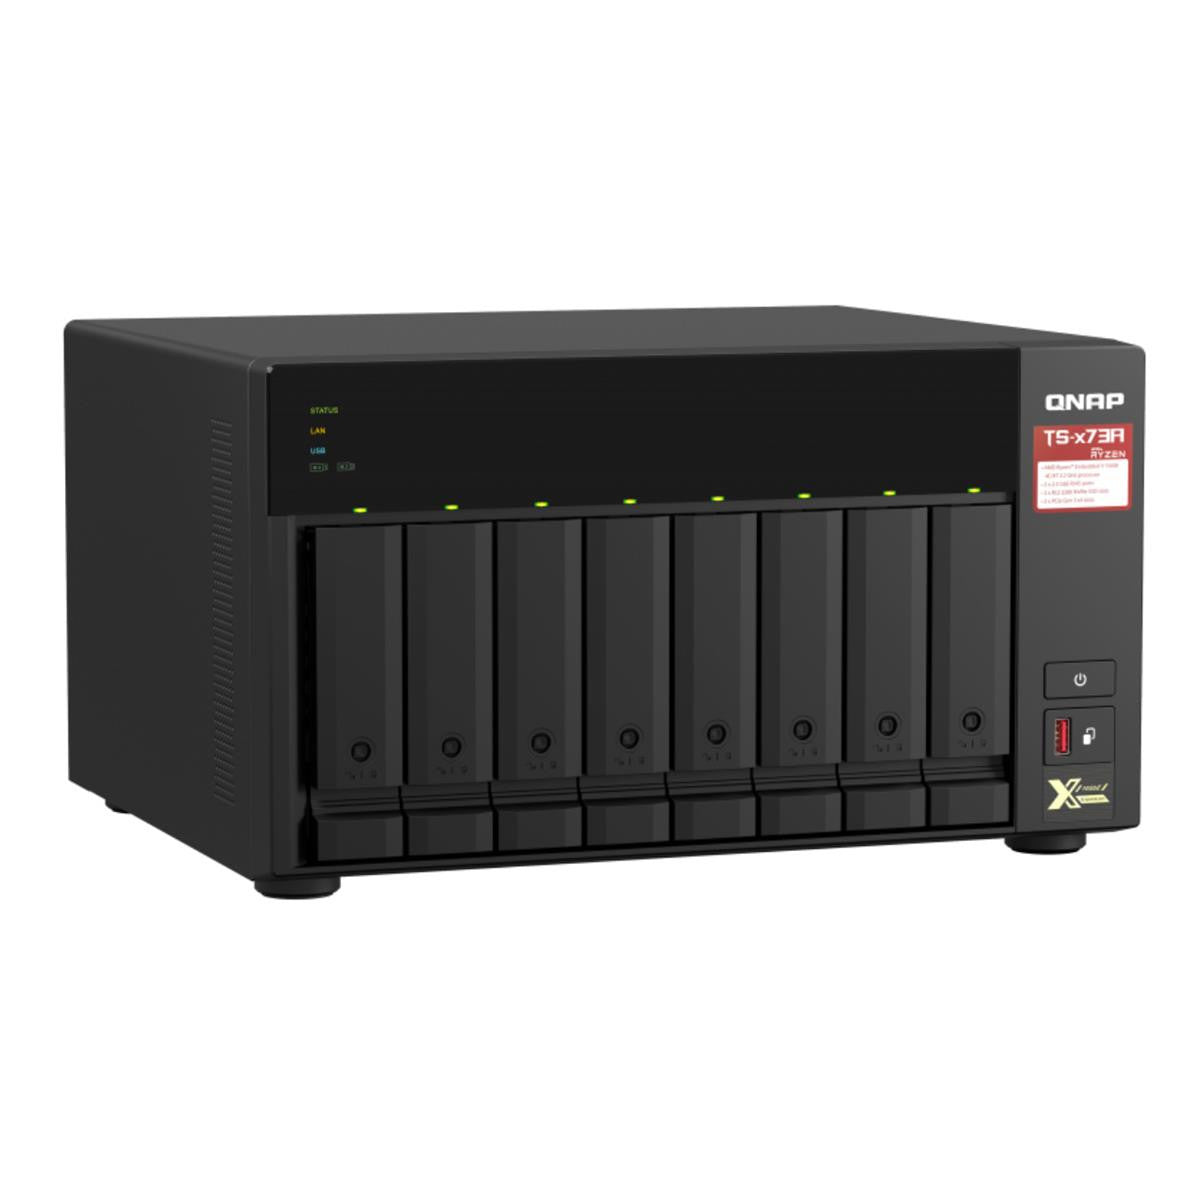 QNAP TS-873A 8-BAY NAS with 8GB DDR4 RAM and 24TB (8x3TB) Seagate Ironwolf NAS Drives Fully Assembled and Tested